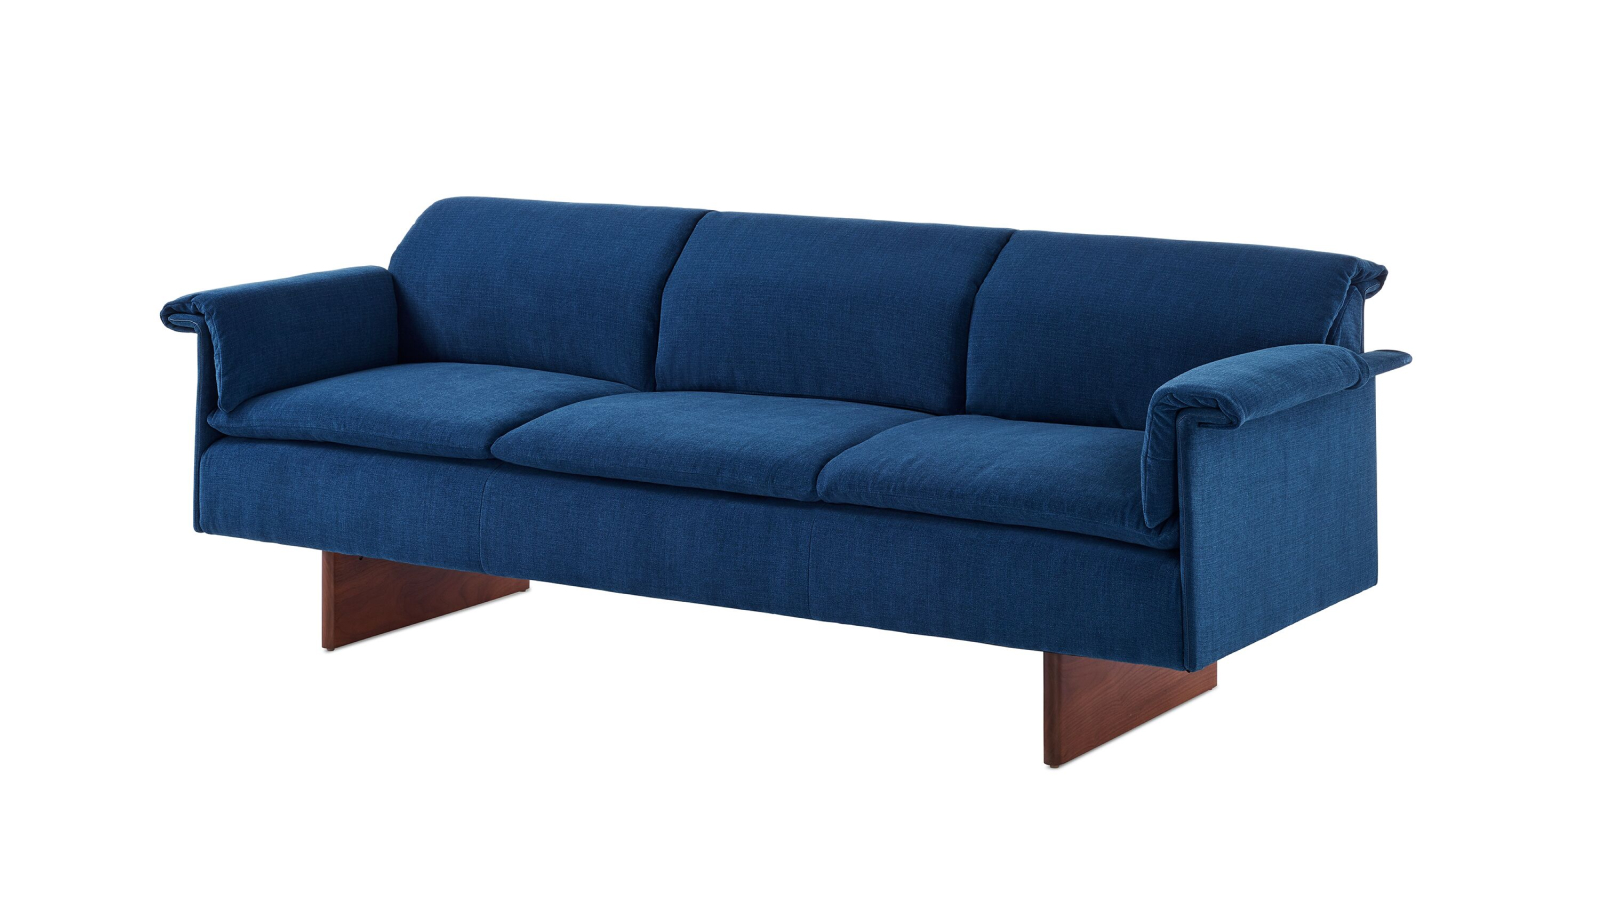 Mantle Couch in navy fabric.